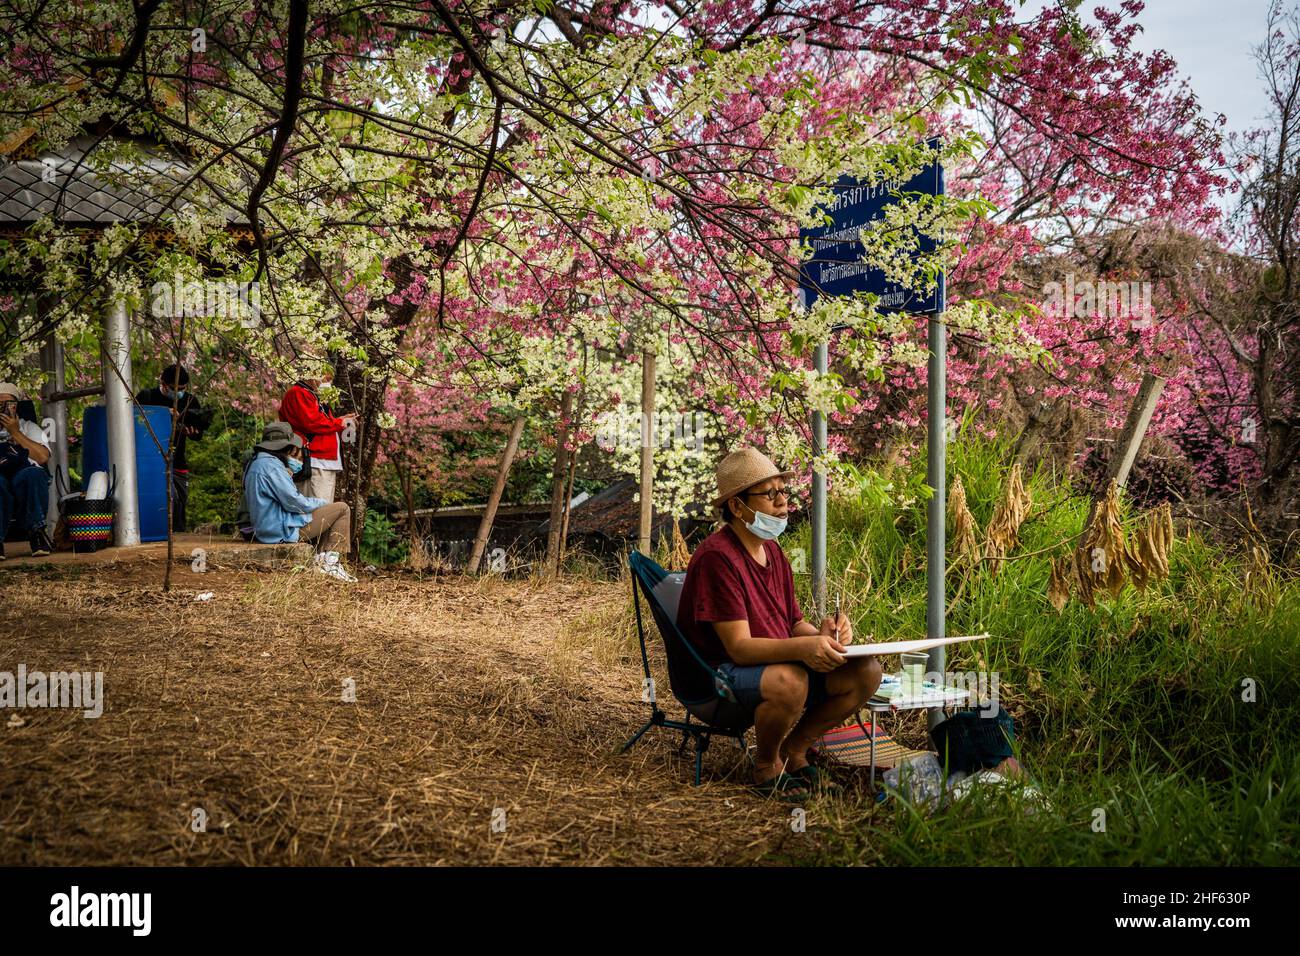 An artist paints a photo of Himalayan Cherry Blossom trees.Tourists visit the Khun Wang Royal Agricultural project in Chiang Mai to observe the blooming of the Himalayan Cherry Blossoms. This rare natural event happens for a short period once a year near Doi Inthanon, the mountain with the highest peak in Thailand. (Photo by Matt Hunt / SOPA Images/Sipa USA) Stock Photo